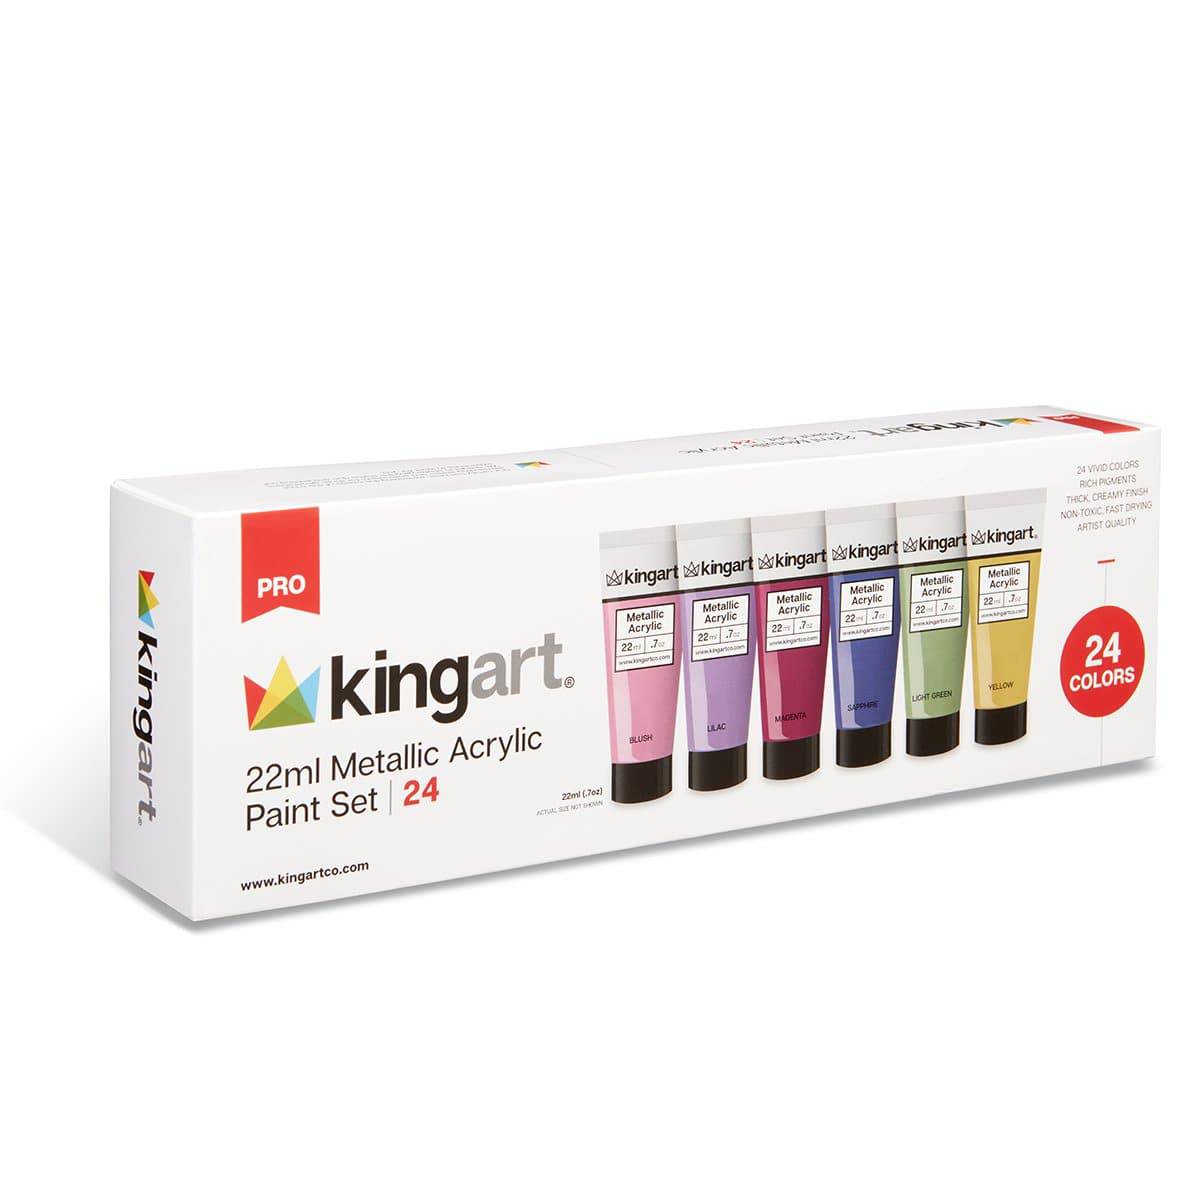 72 Color Set of Acrylic Paint in Large 18ml Tubes - Rich Vivid Colors for  Artists, Students, 72 Colors - 18ml Tubes - King Soopers